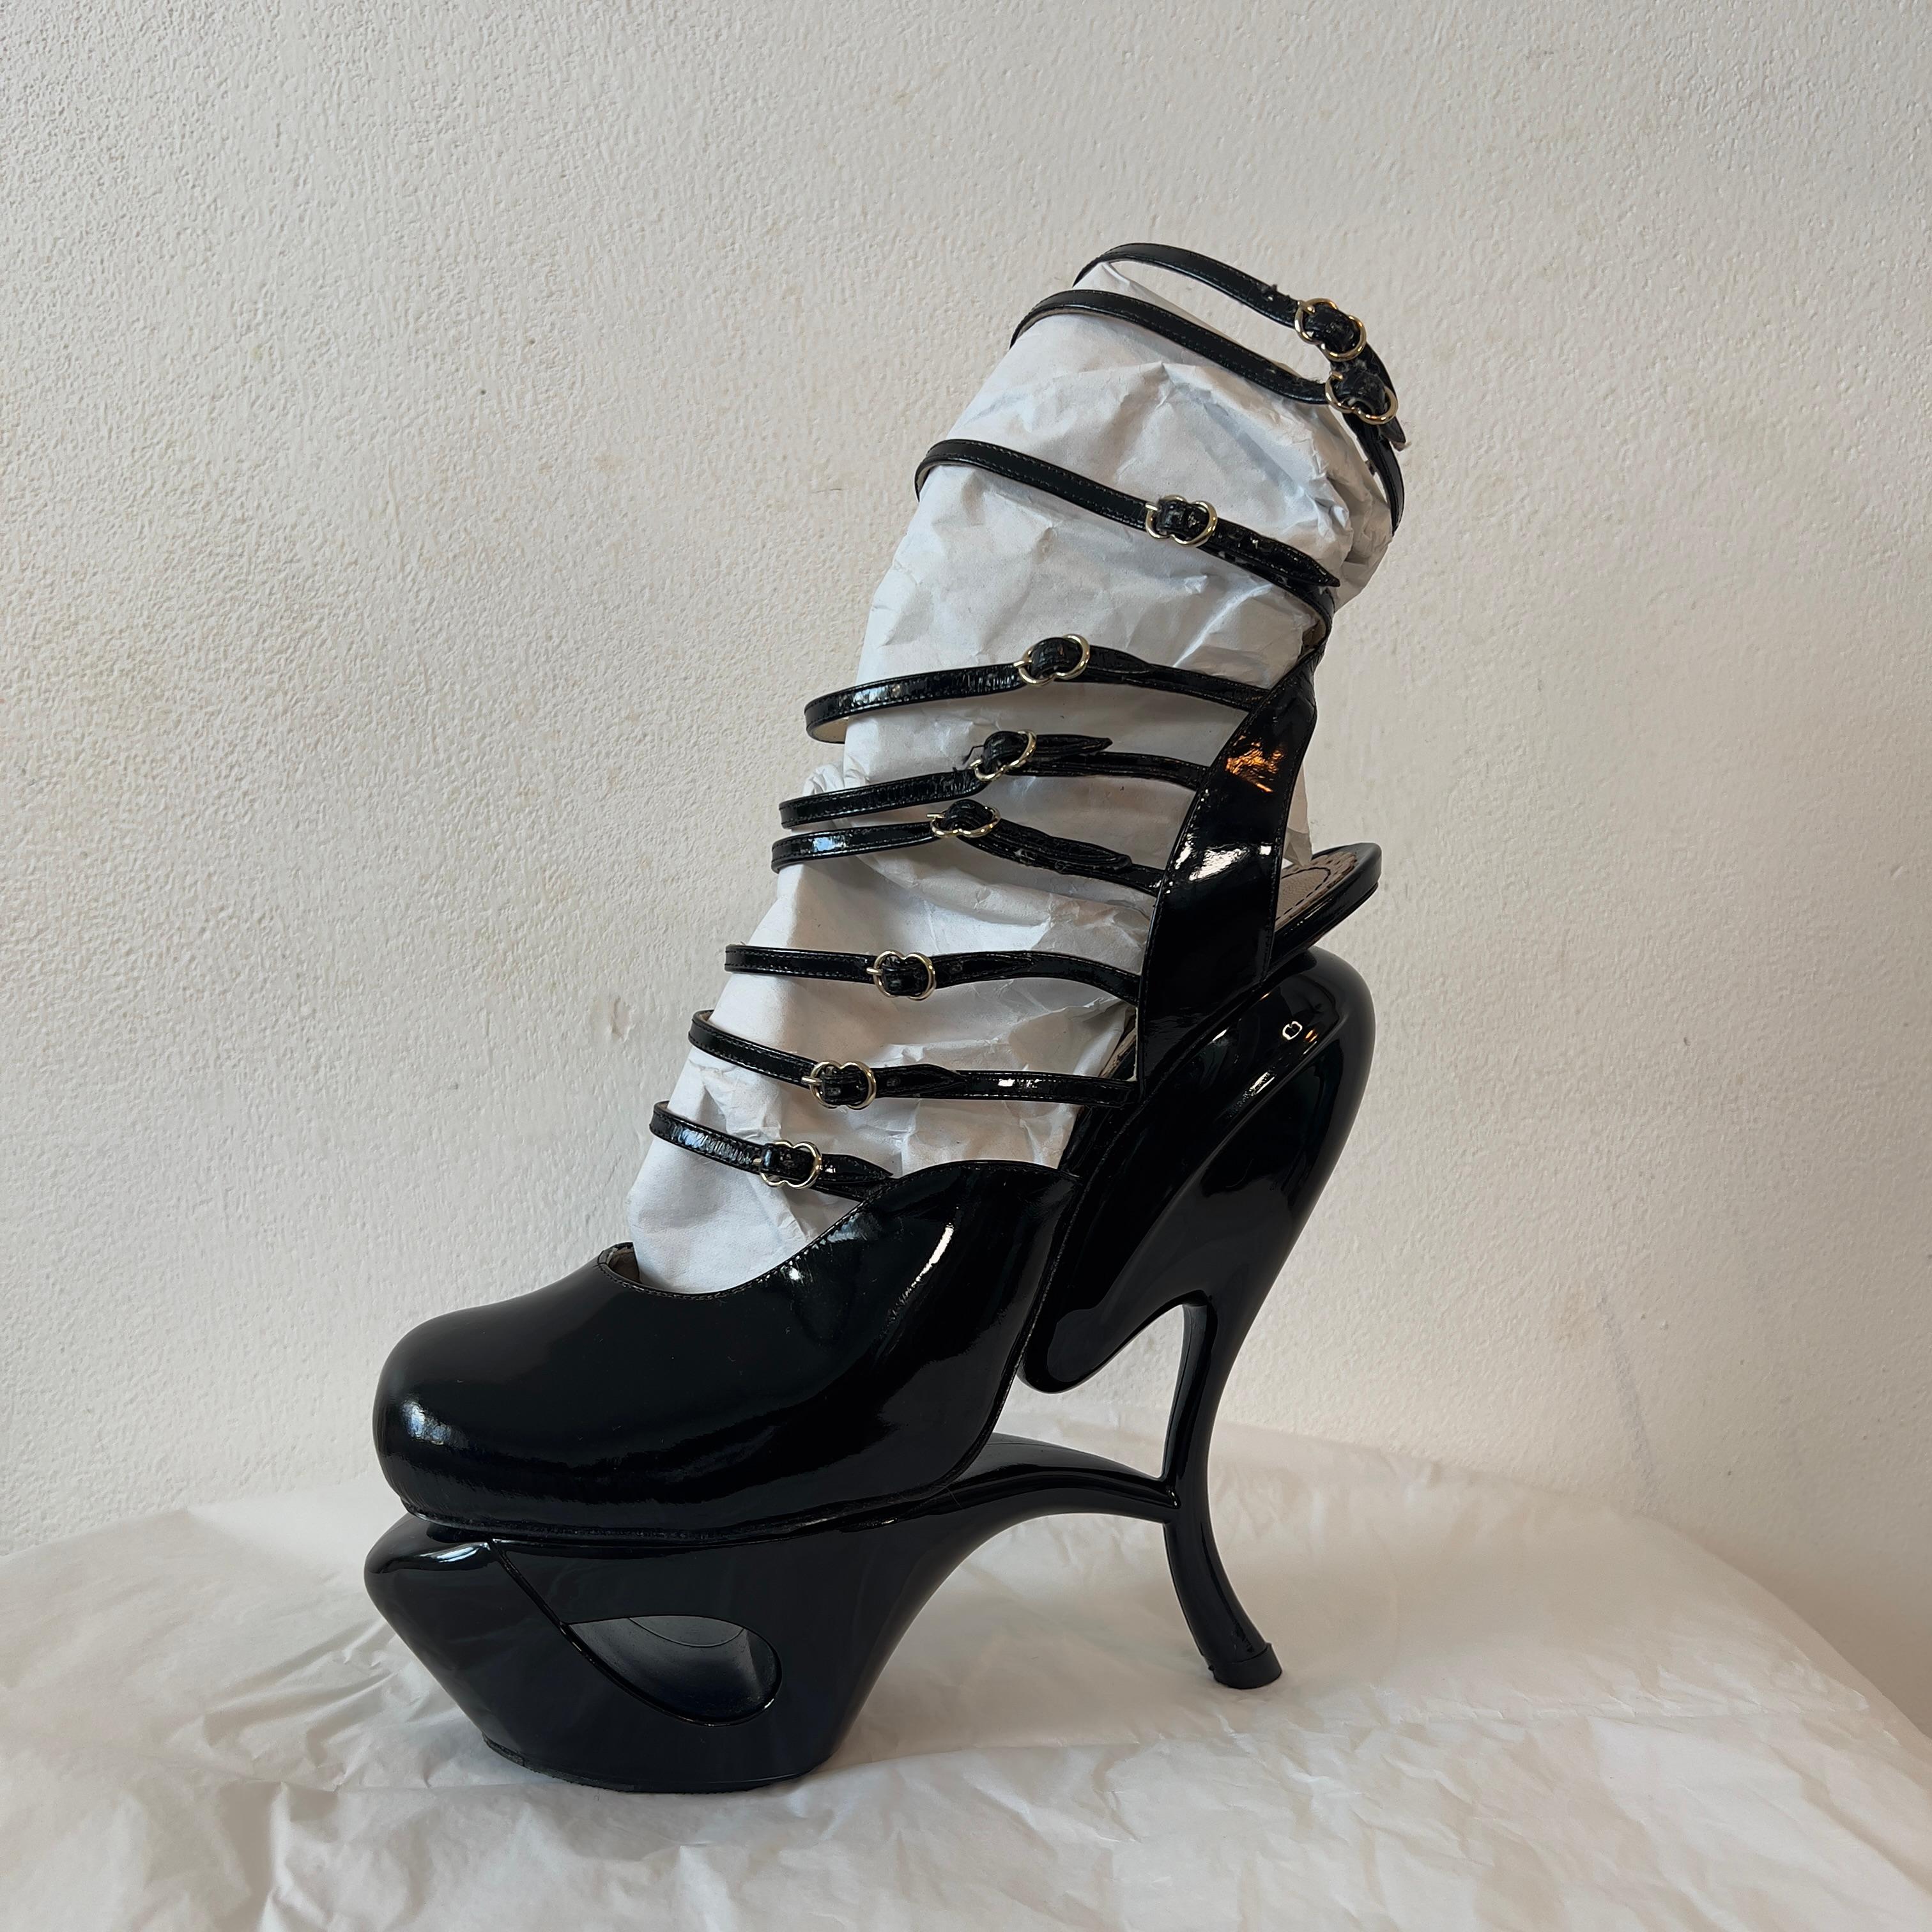 Platform heels in patent leather adorned with gold hardware modeled in multiple looks for John Galliano's spring 2009 runway collection. 

Size: 39 (fits circa 38)
Condition: 8/10, very good preloved condition with signs of use on the leather straps